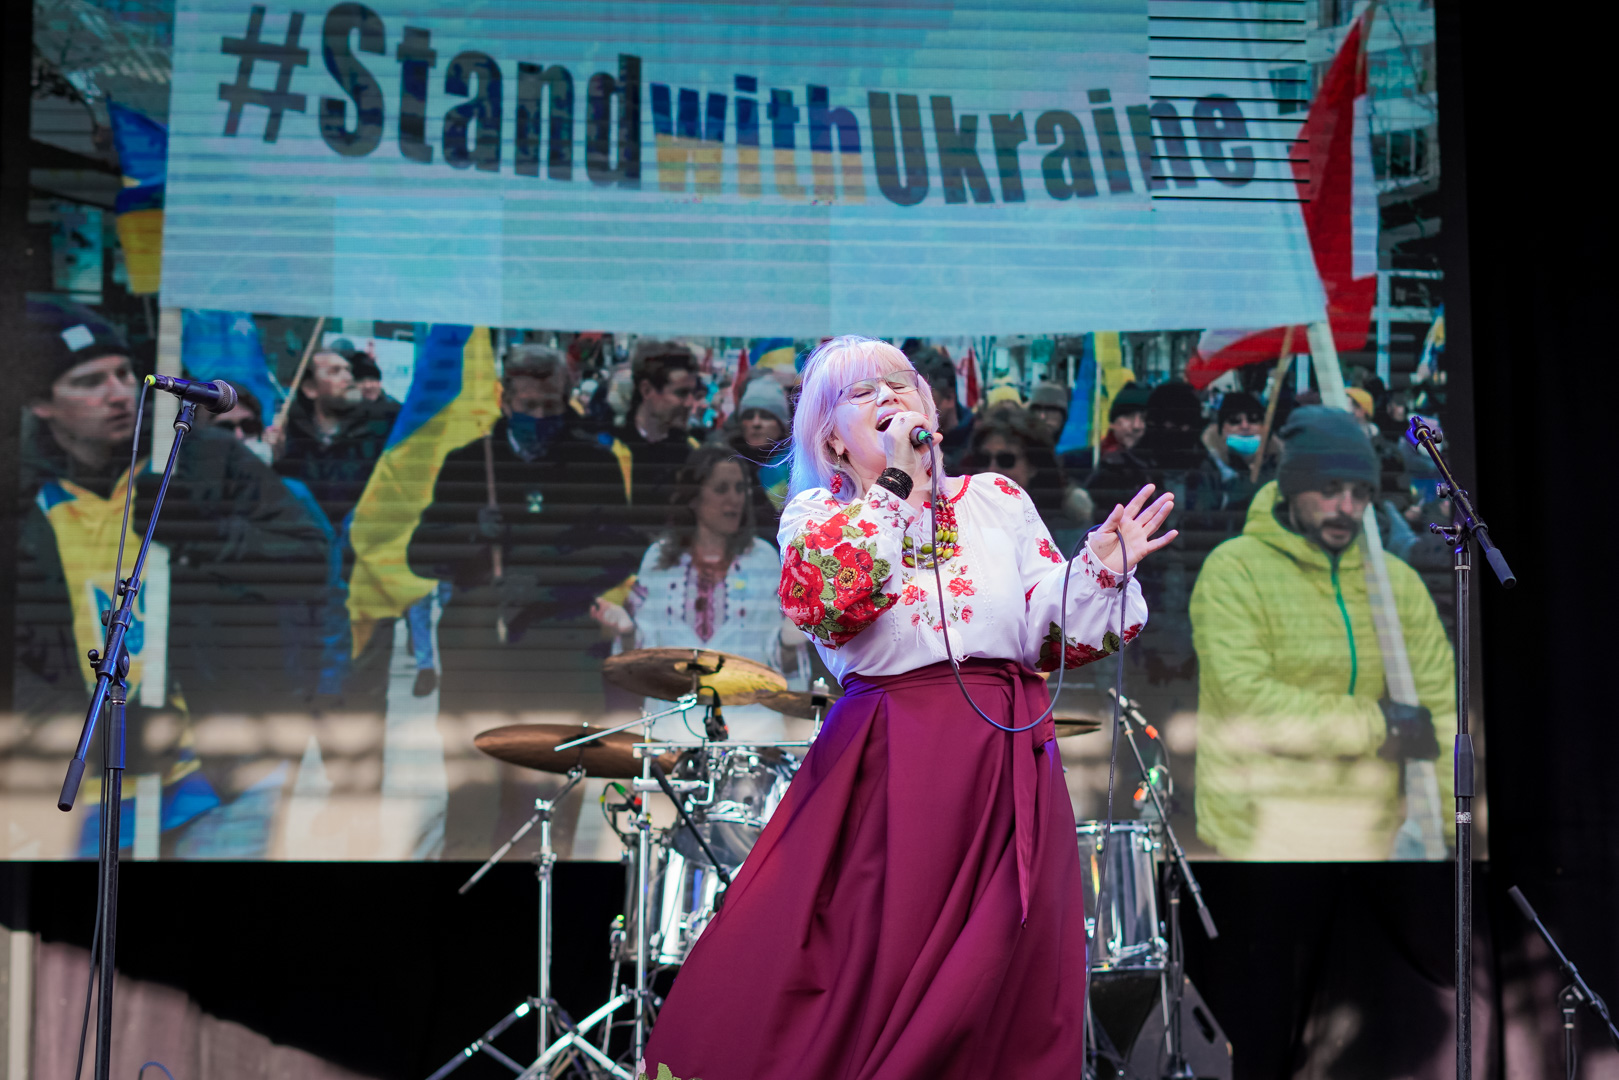 A woman sings in front of a stage with image that says "Stand with Ukraine"